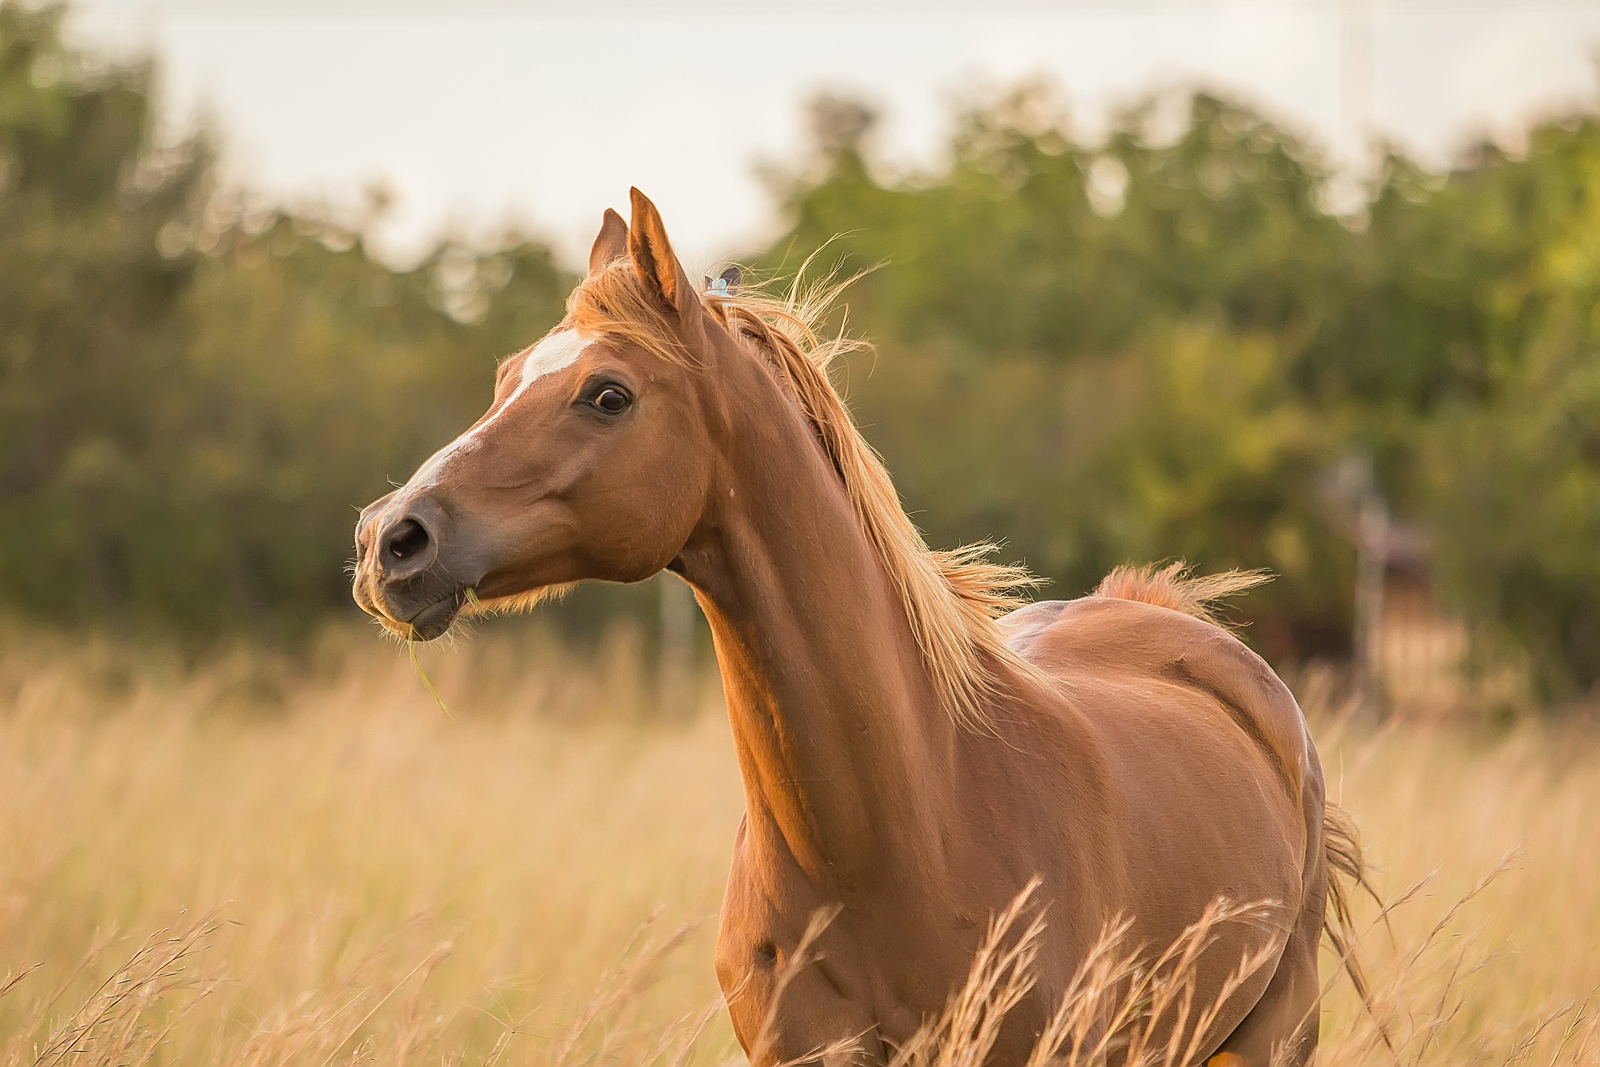 A horse standing in a field of long grass at sunset